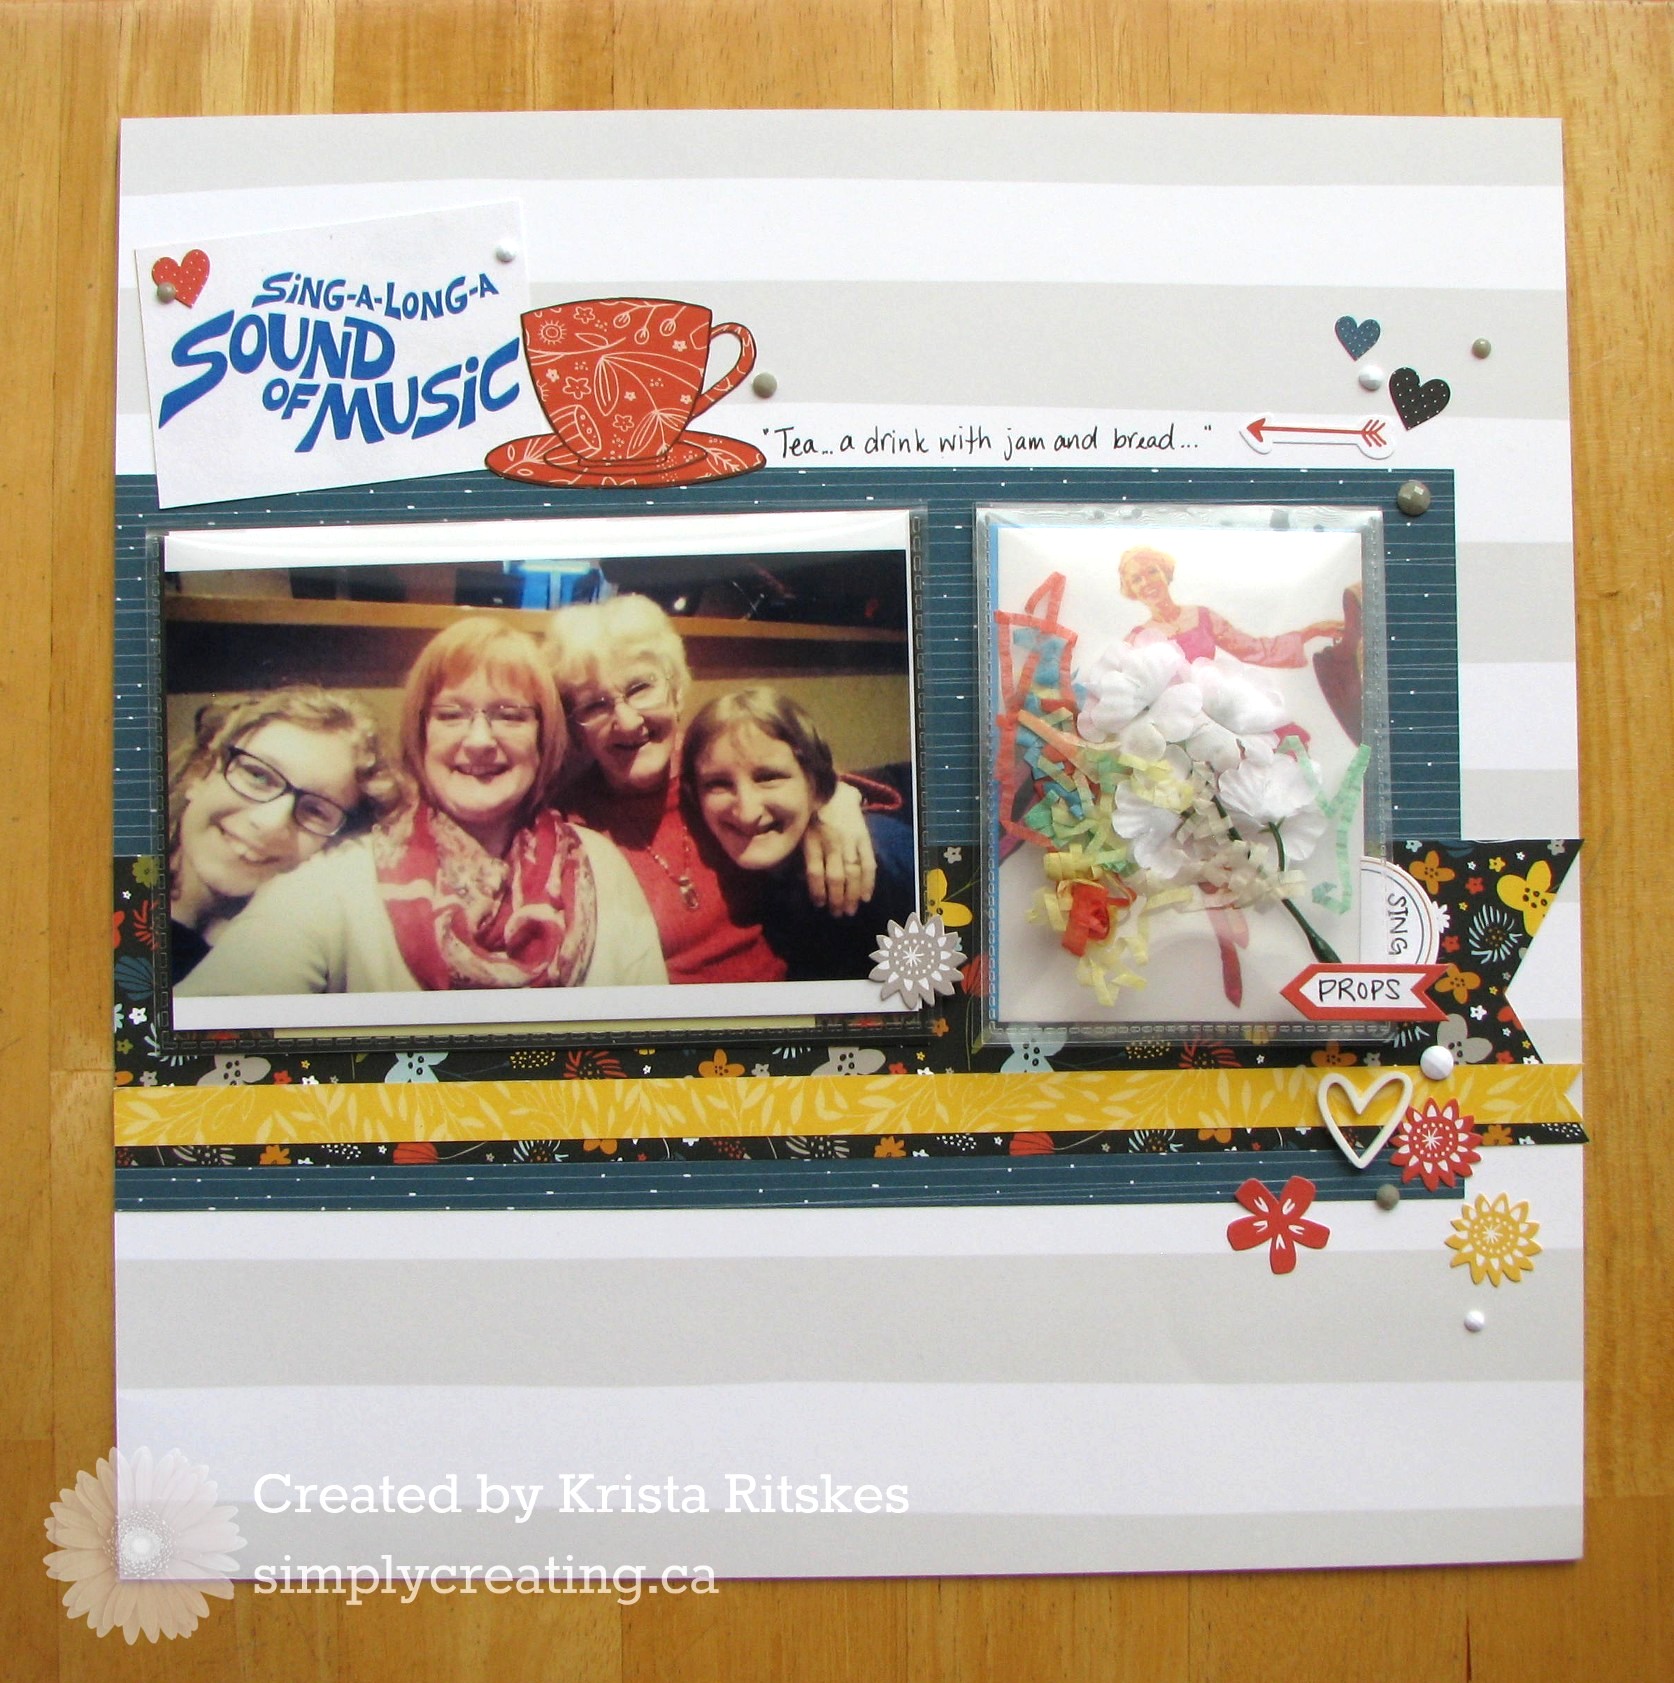 Sound of Music layout by Krista Ritskes #simplycreatingcrafts